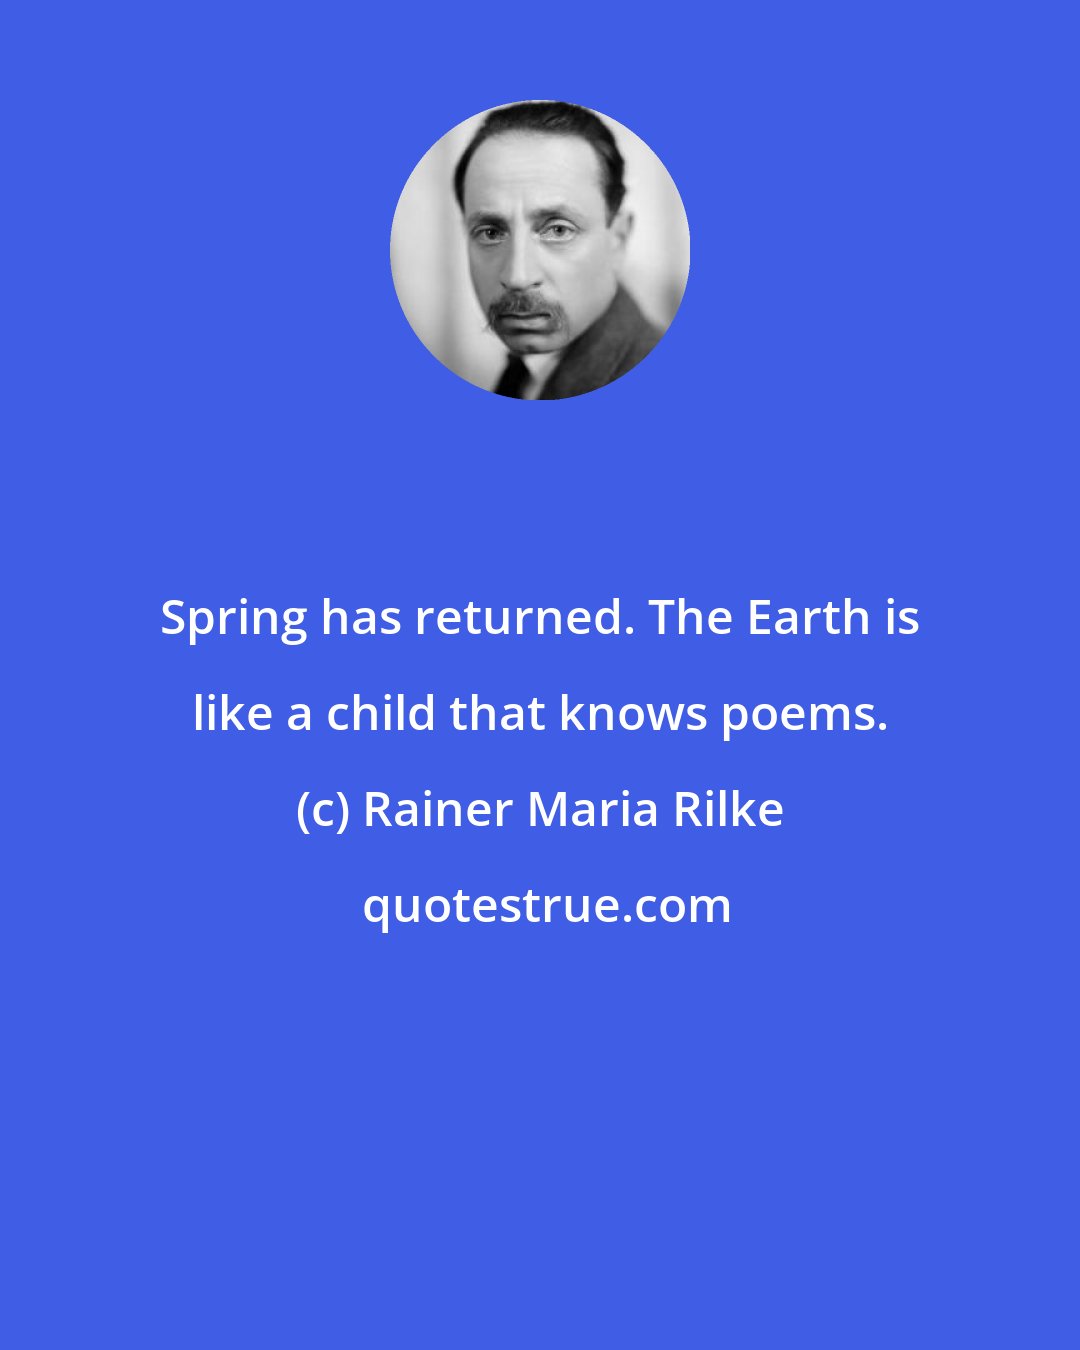 Rainer Maria Rilke: Spring has returned. The Earth is like a child that knows poems.